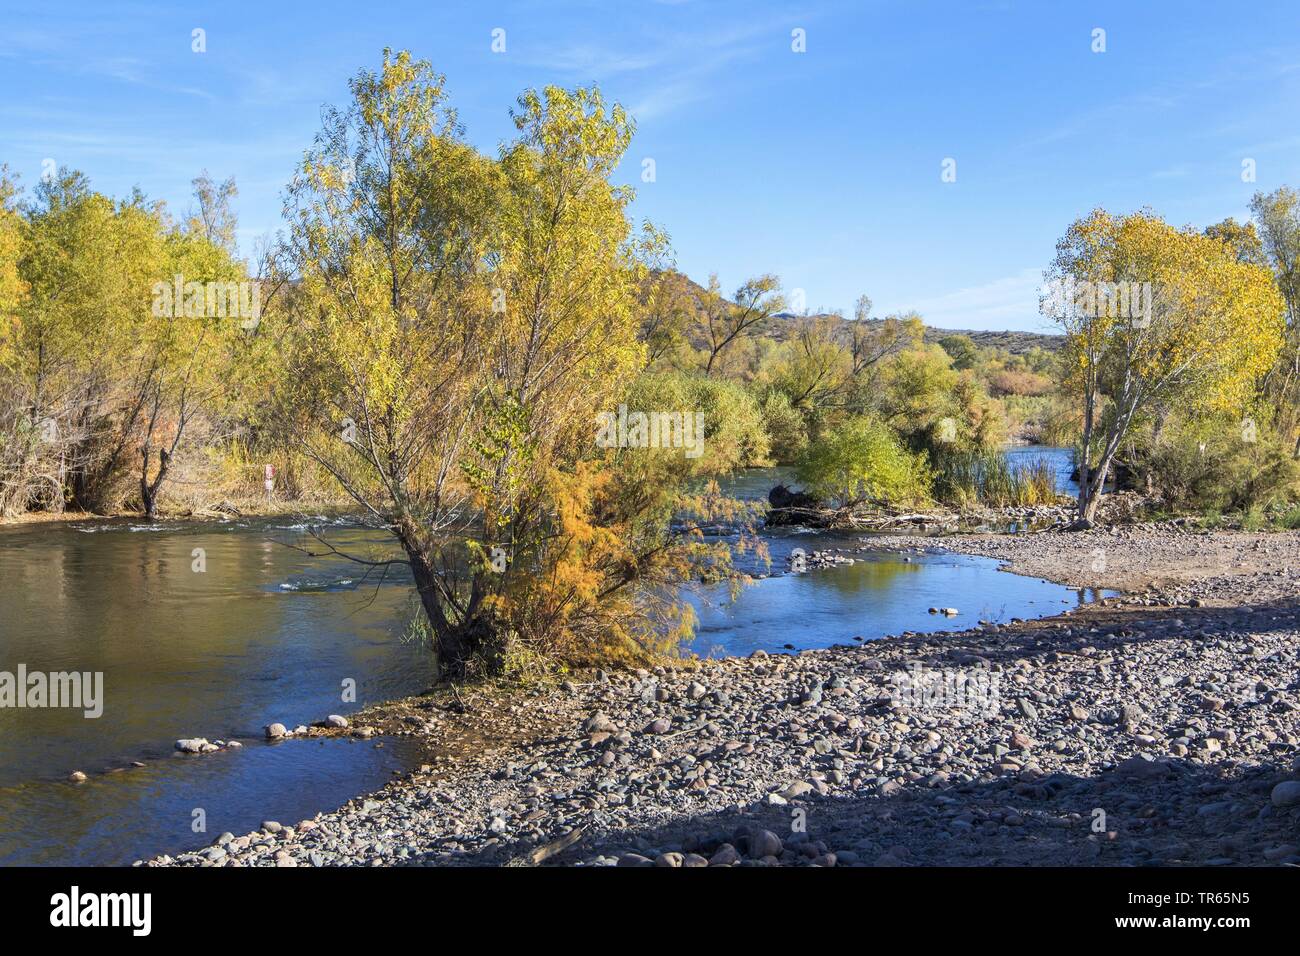 willows and cottonwood trees on the riverbank in autumn, USA, Arizona, Verde River, Rio Verde Stock Photo